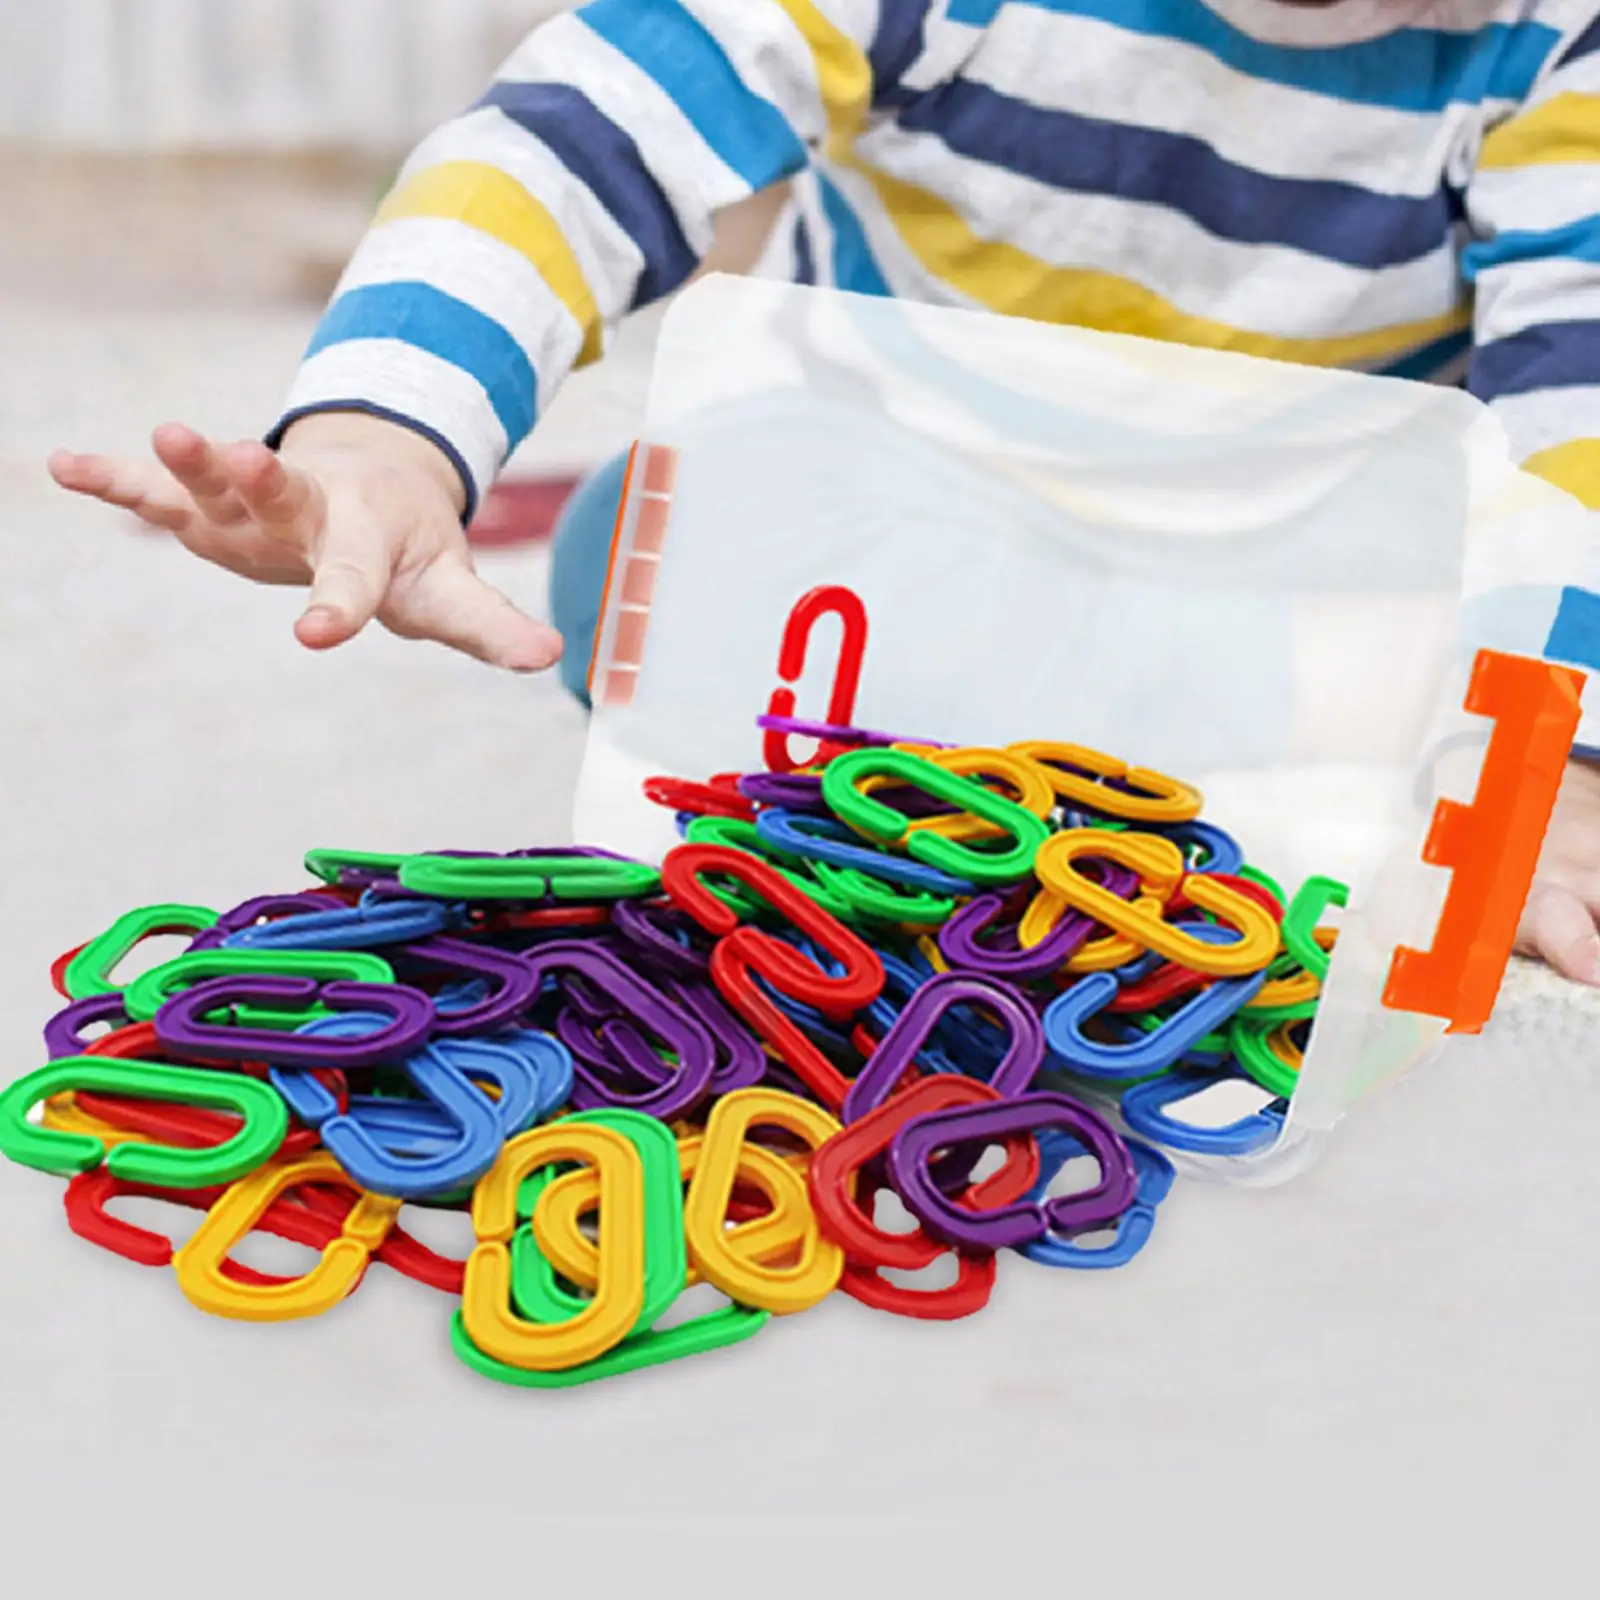 

150x Colorful Links Learning Toys Interchangeable Color Recognition Parrot Bird Toy Cage Rainbow C Links for Playroom Preschool